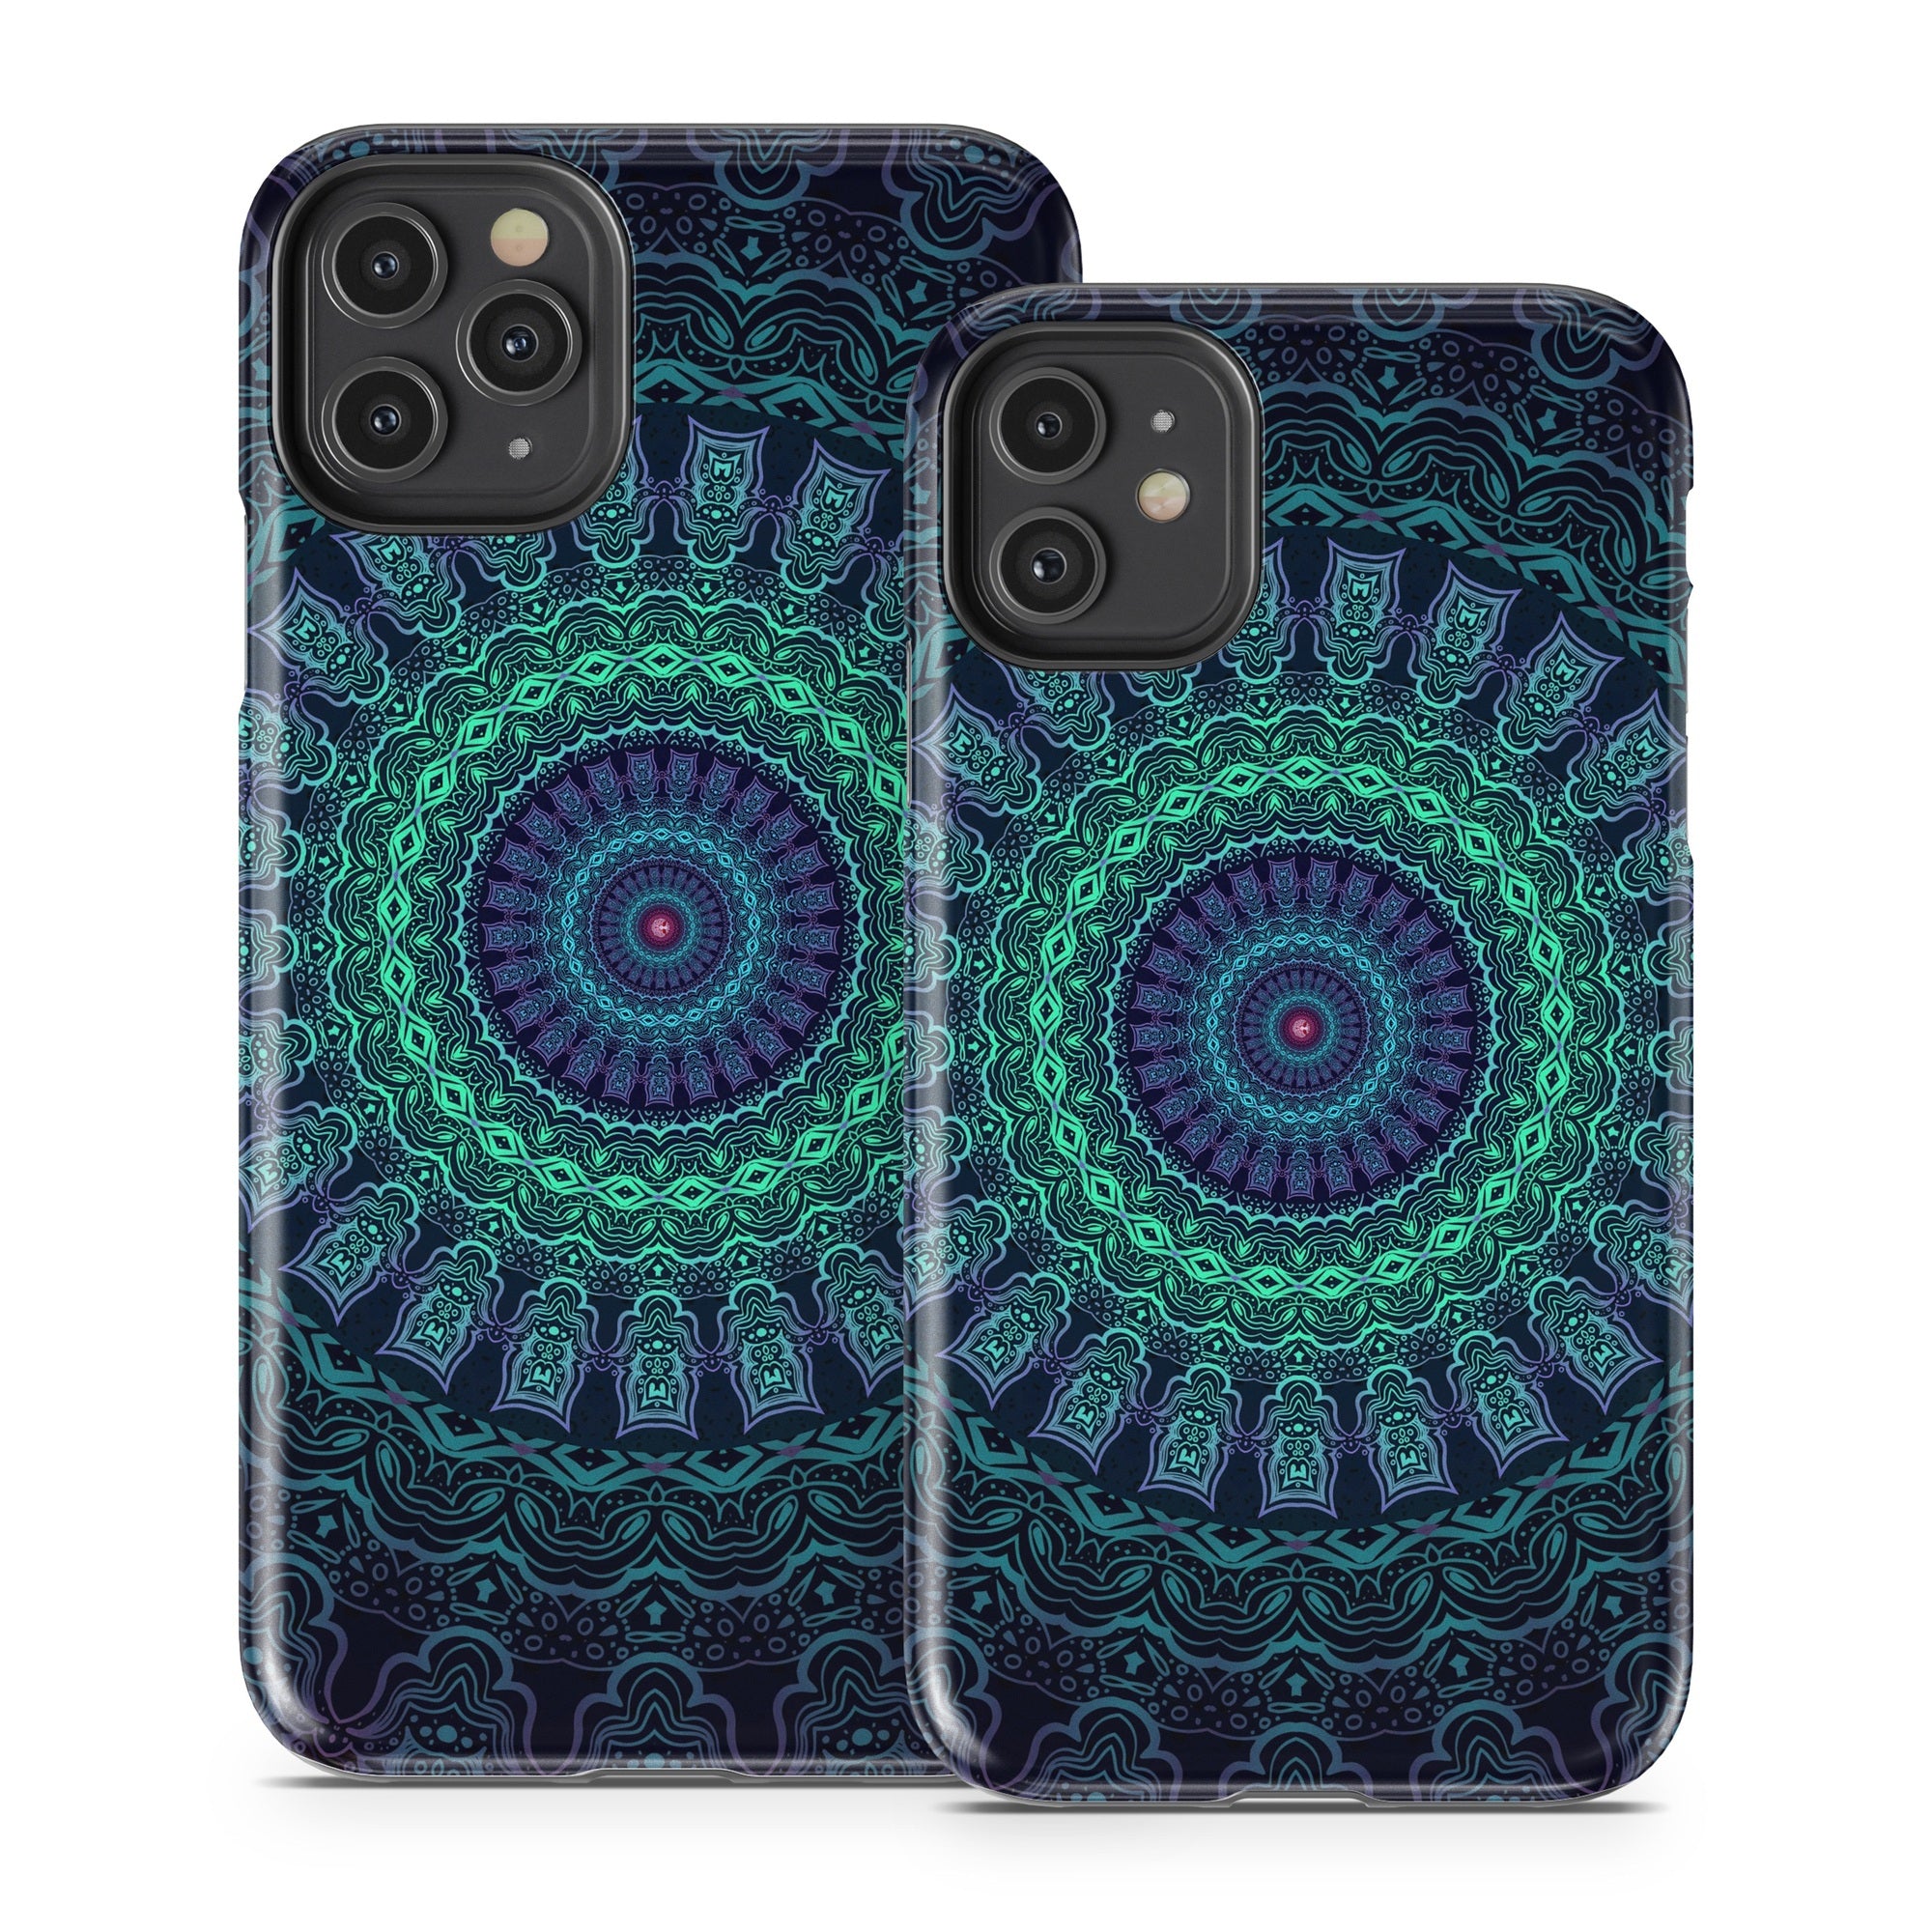 Set And Setting - Apple iPhone 11 Tough Case